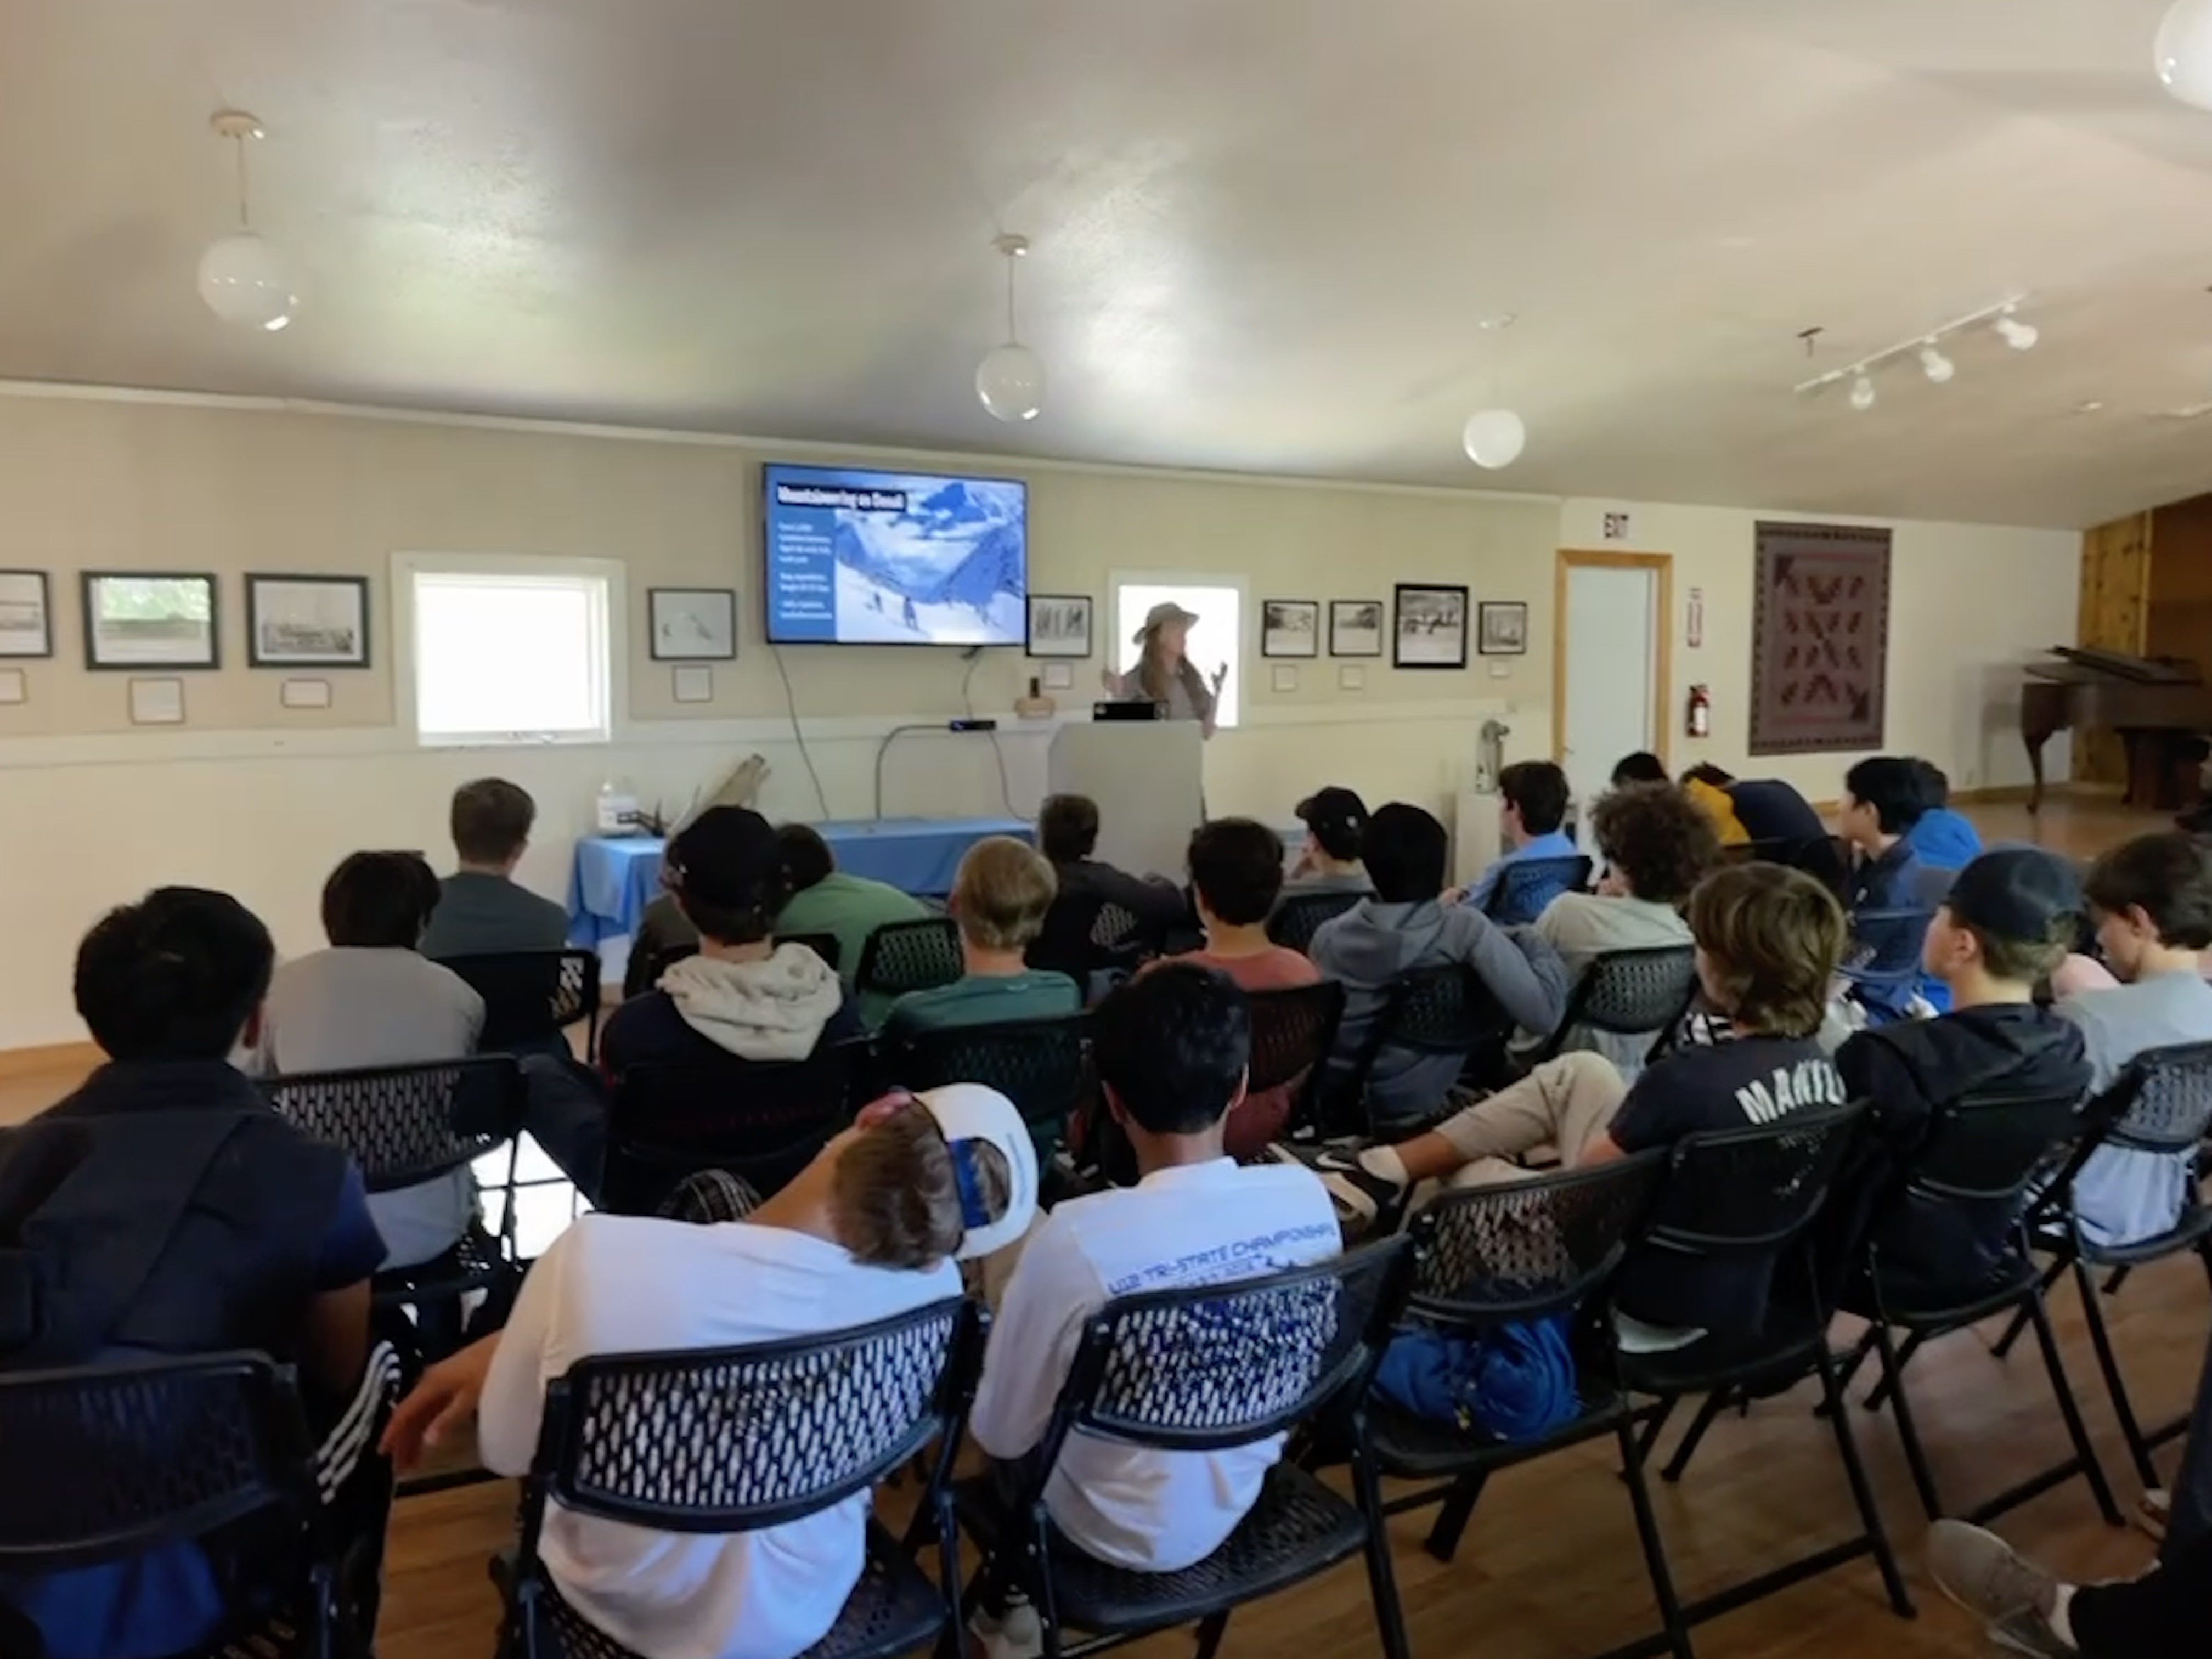 A ranger gives a presentation to an audience of students